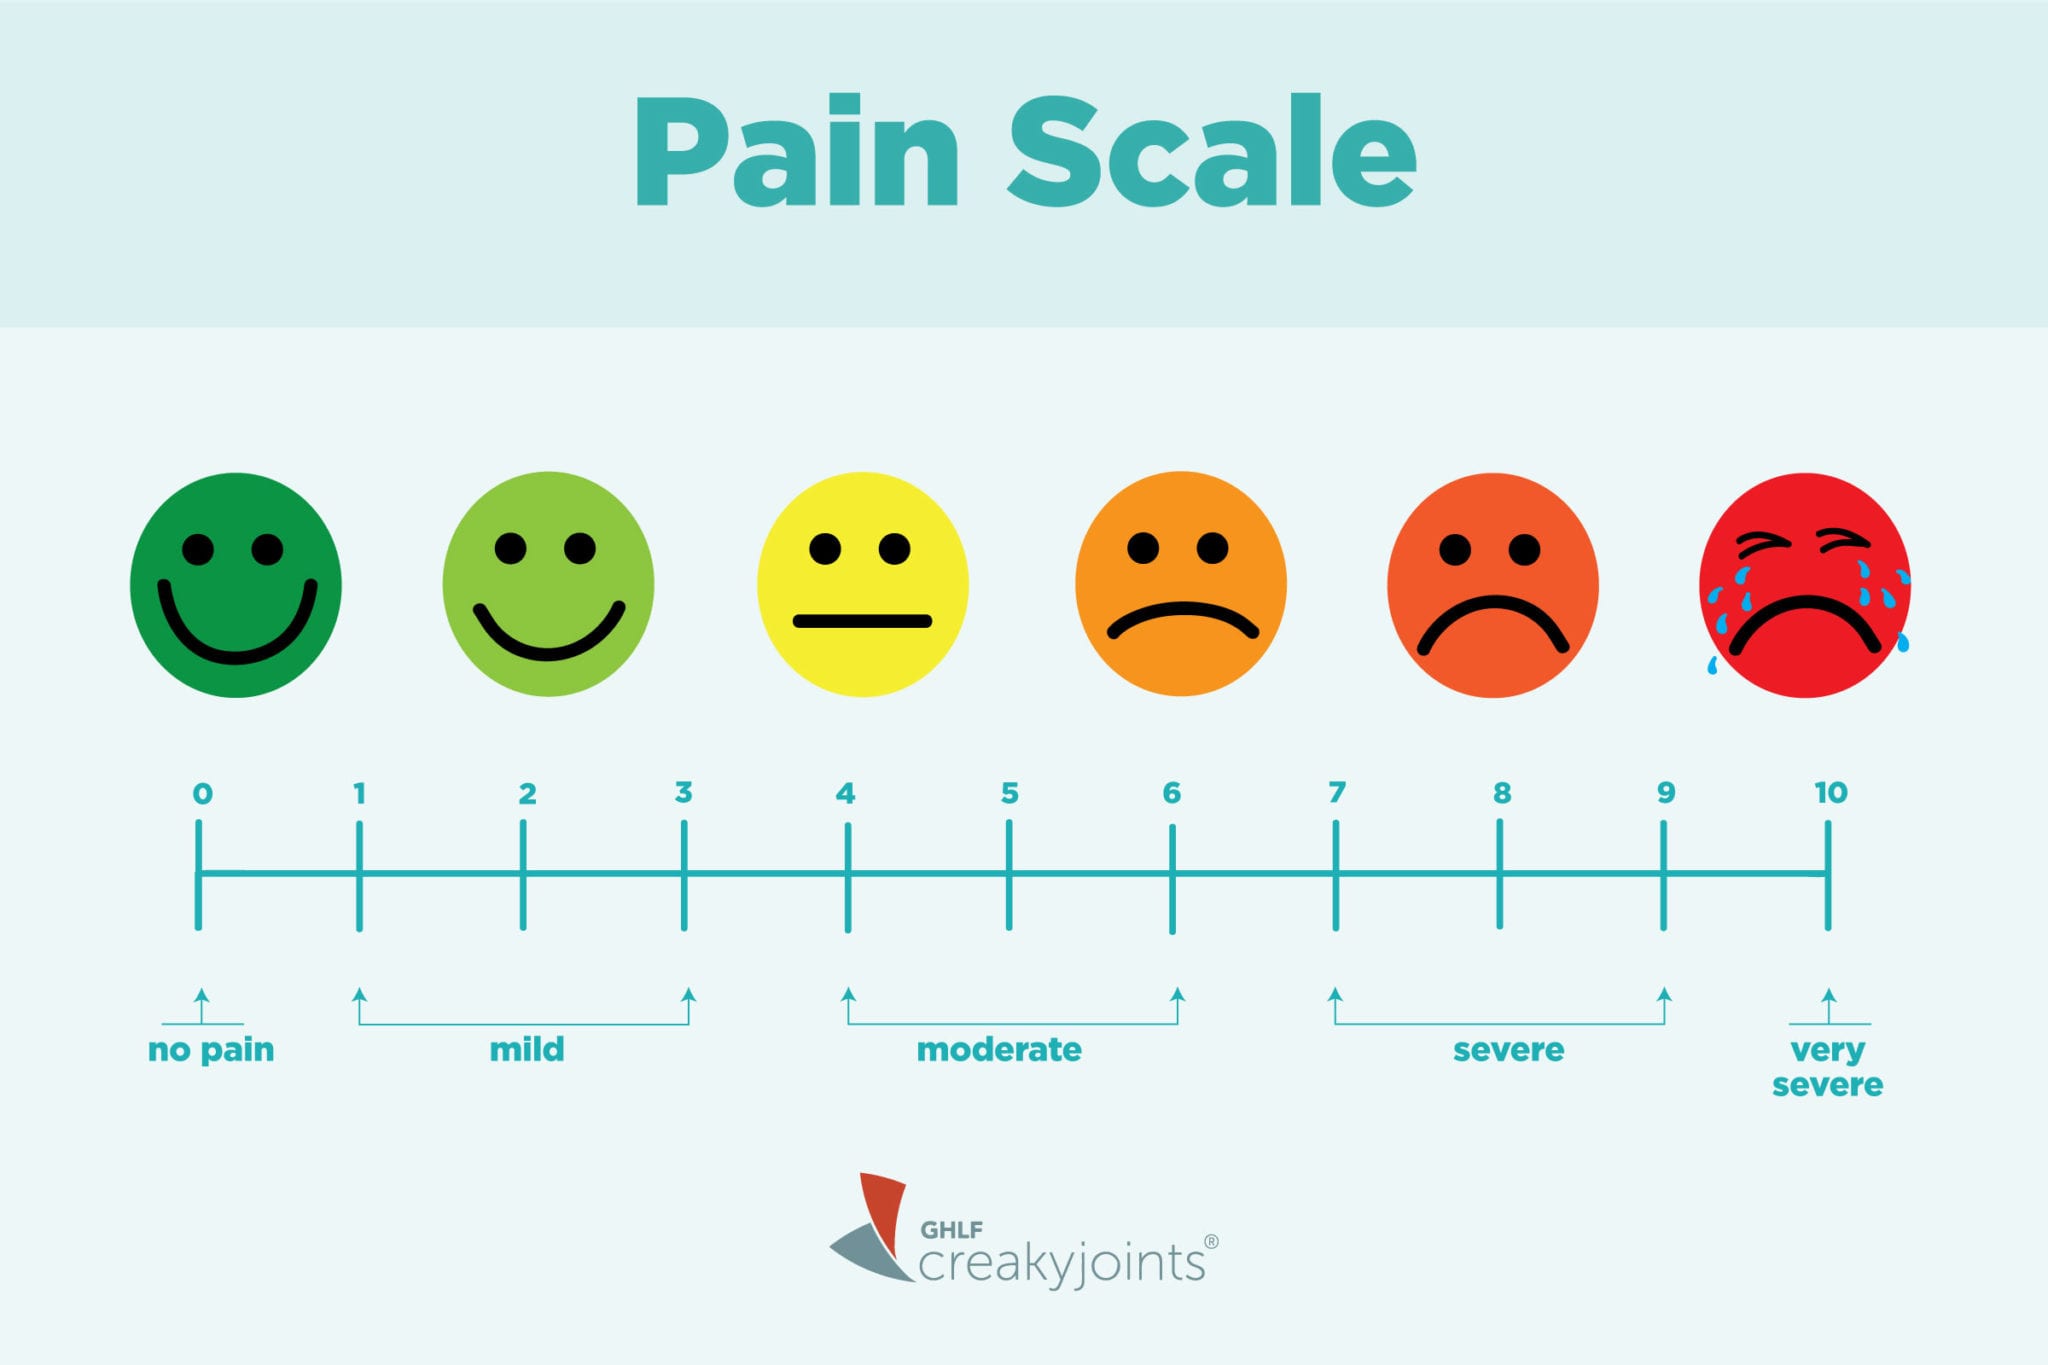 Describing Your Pain With a 0-10 Pain Scale May Be Messing With Your  Treatment. Here's What You Can Say Instead. – CreakyJoints